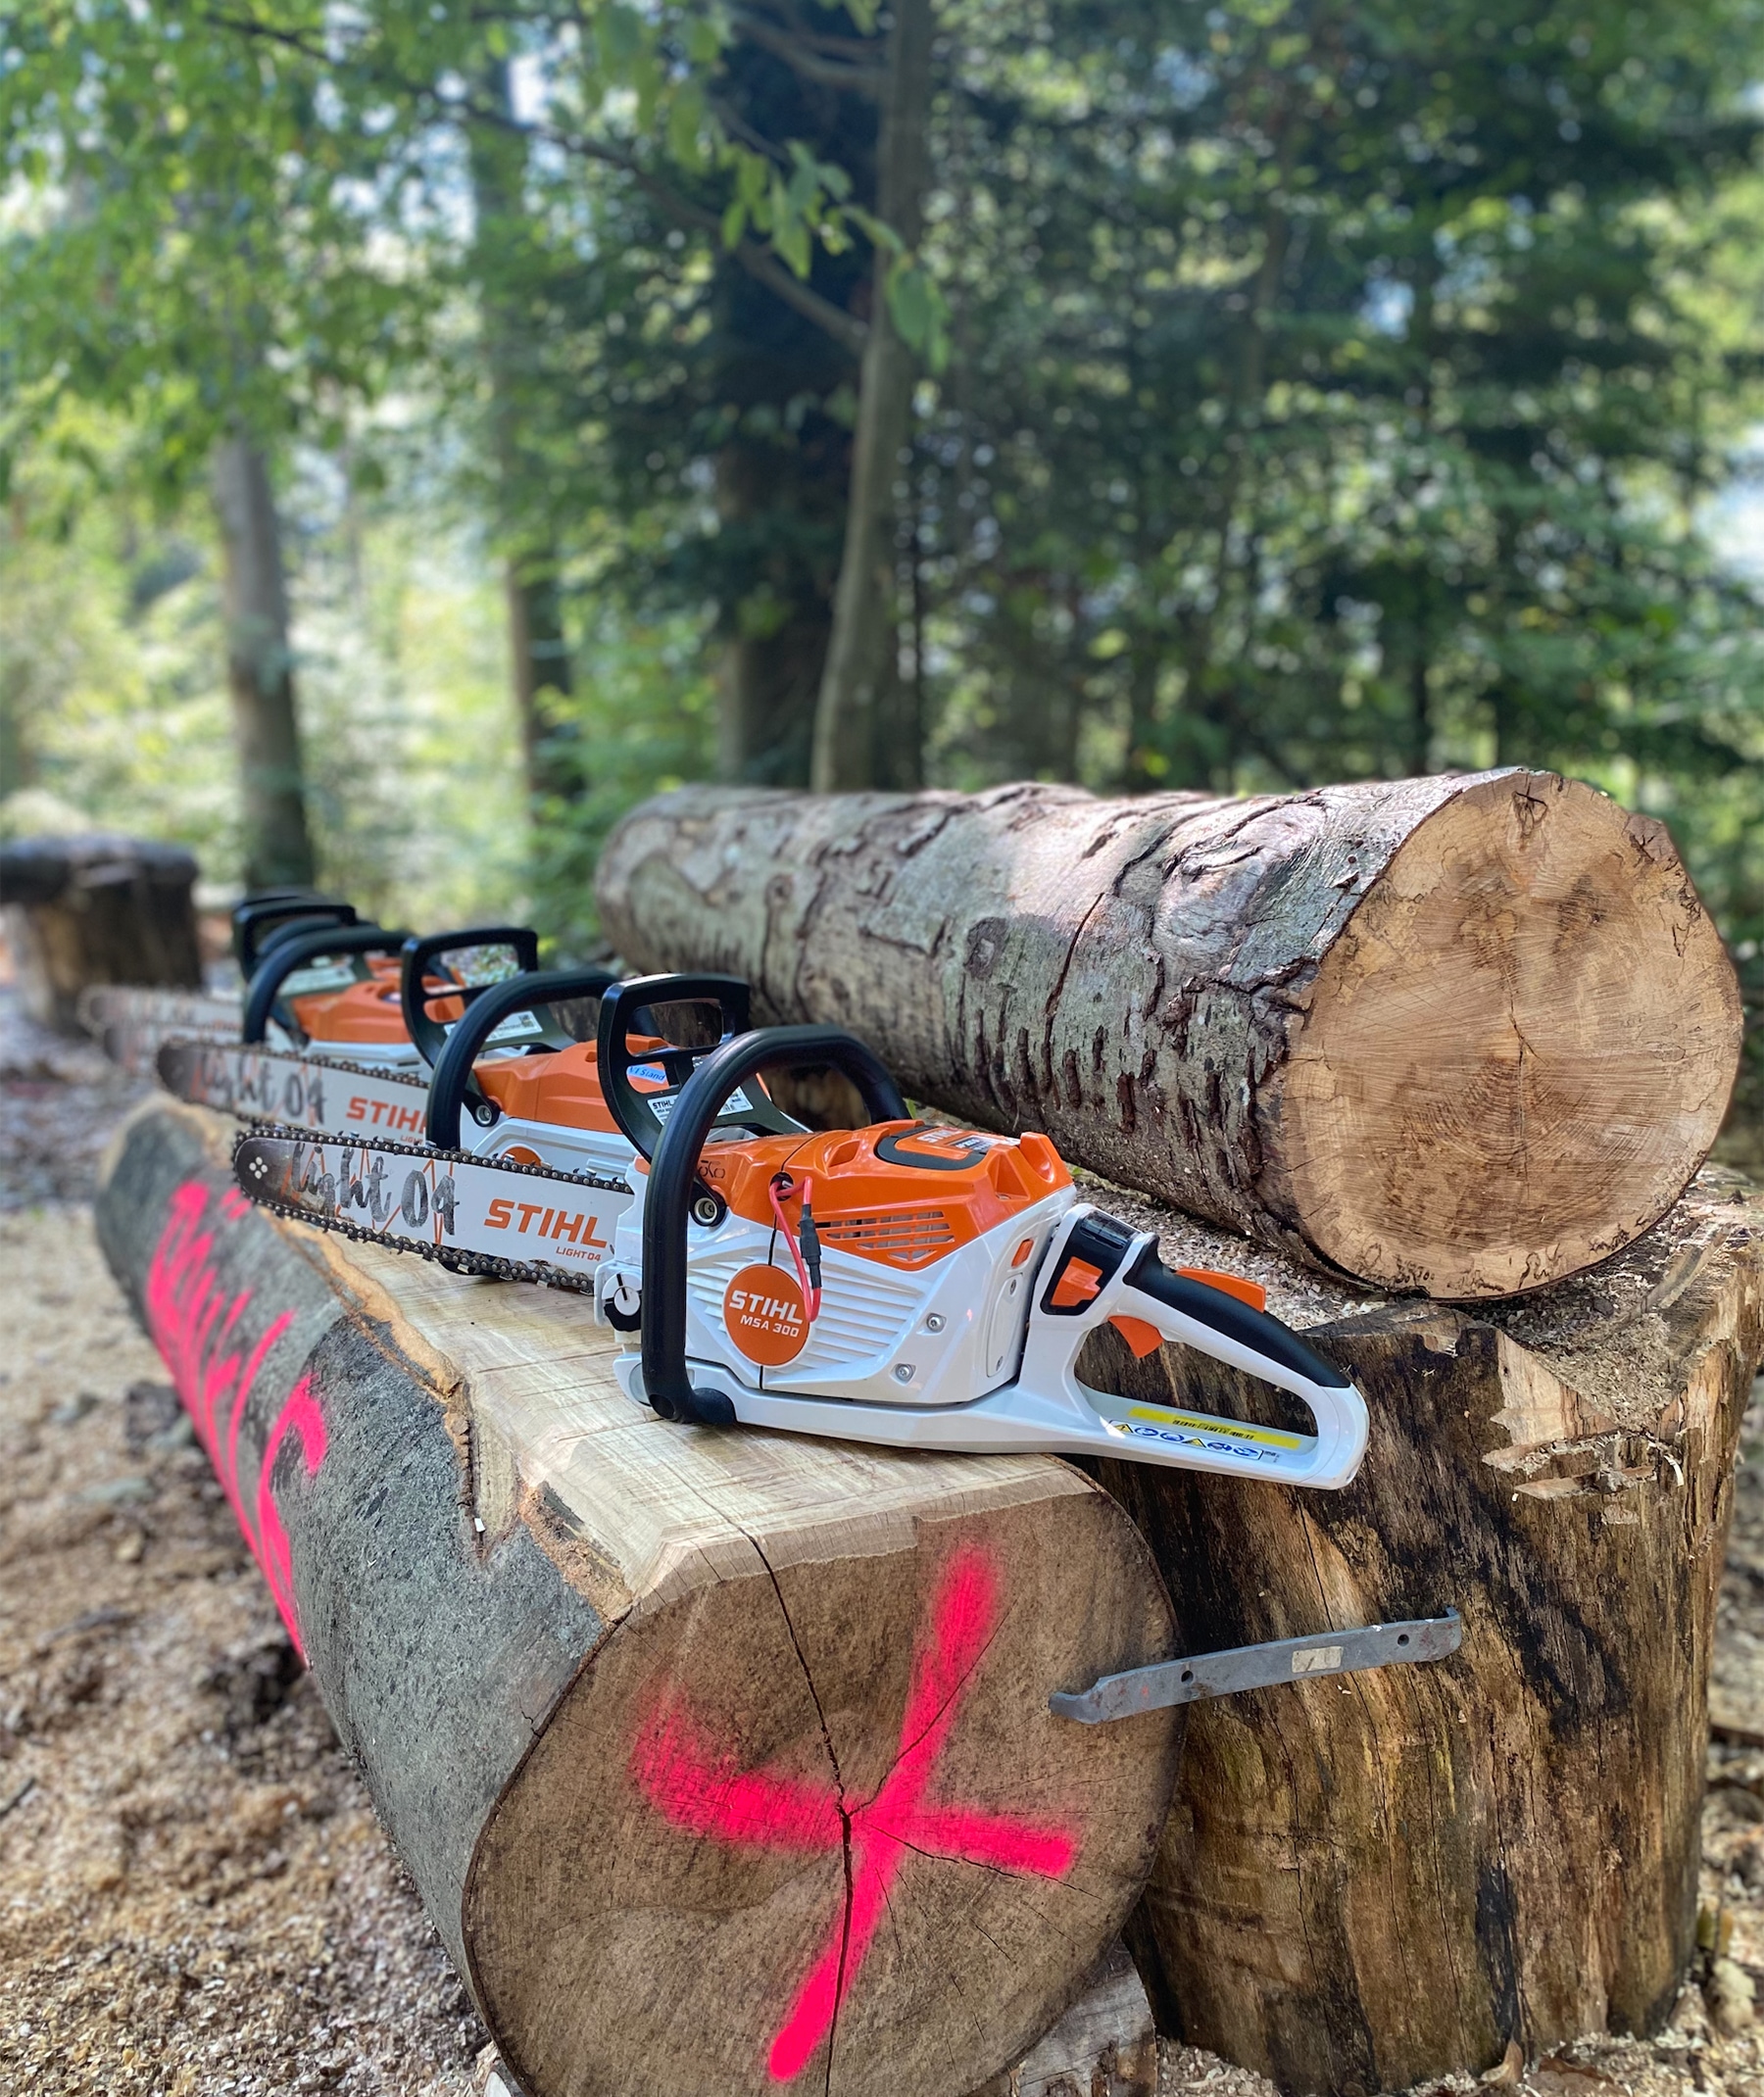 The cordless saws are subjected to a critical examination in the form of the application review and tested for all aspects that are important for future customers.